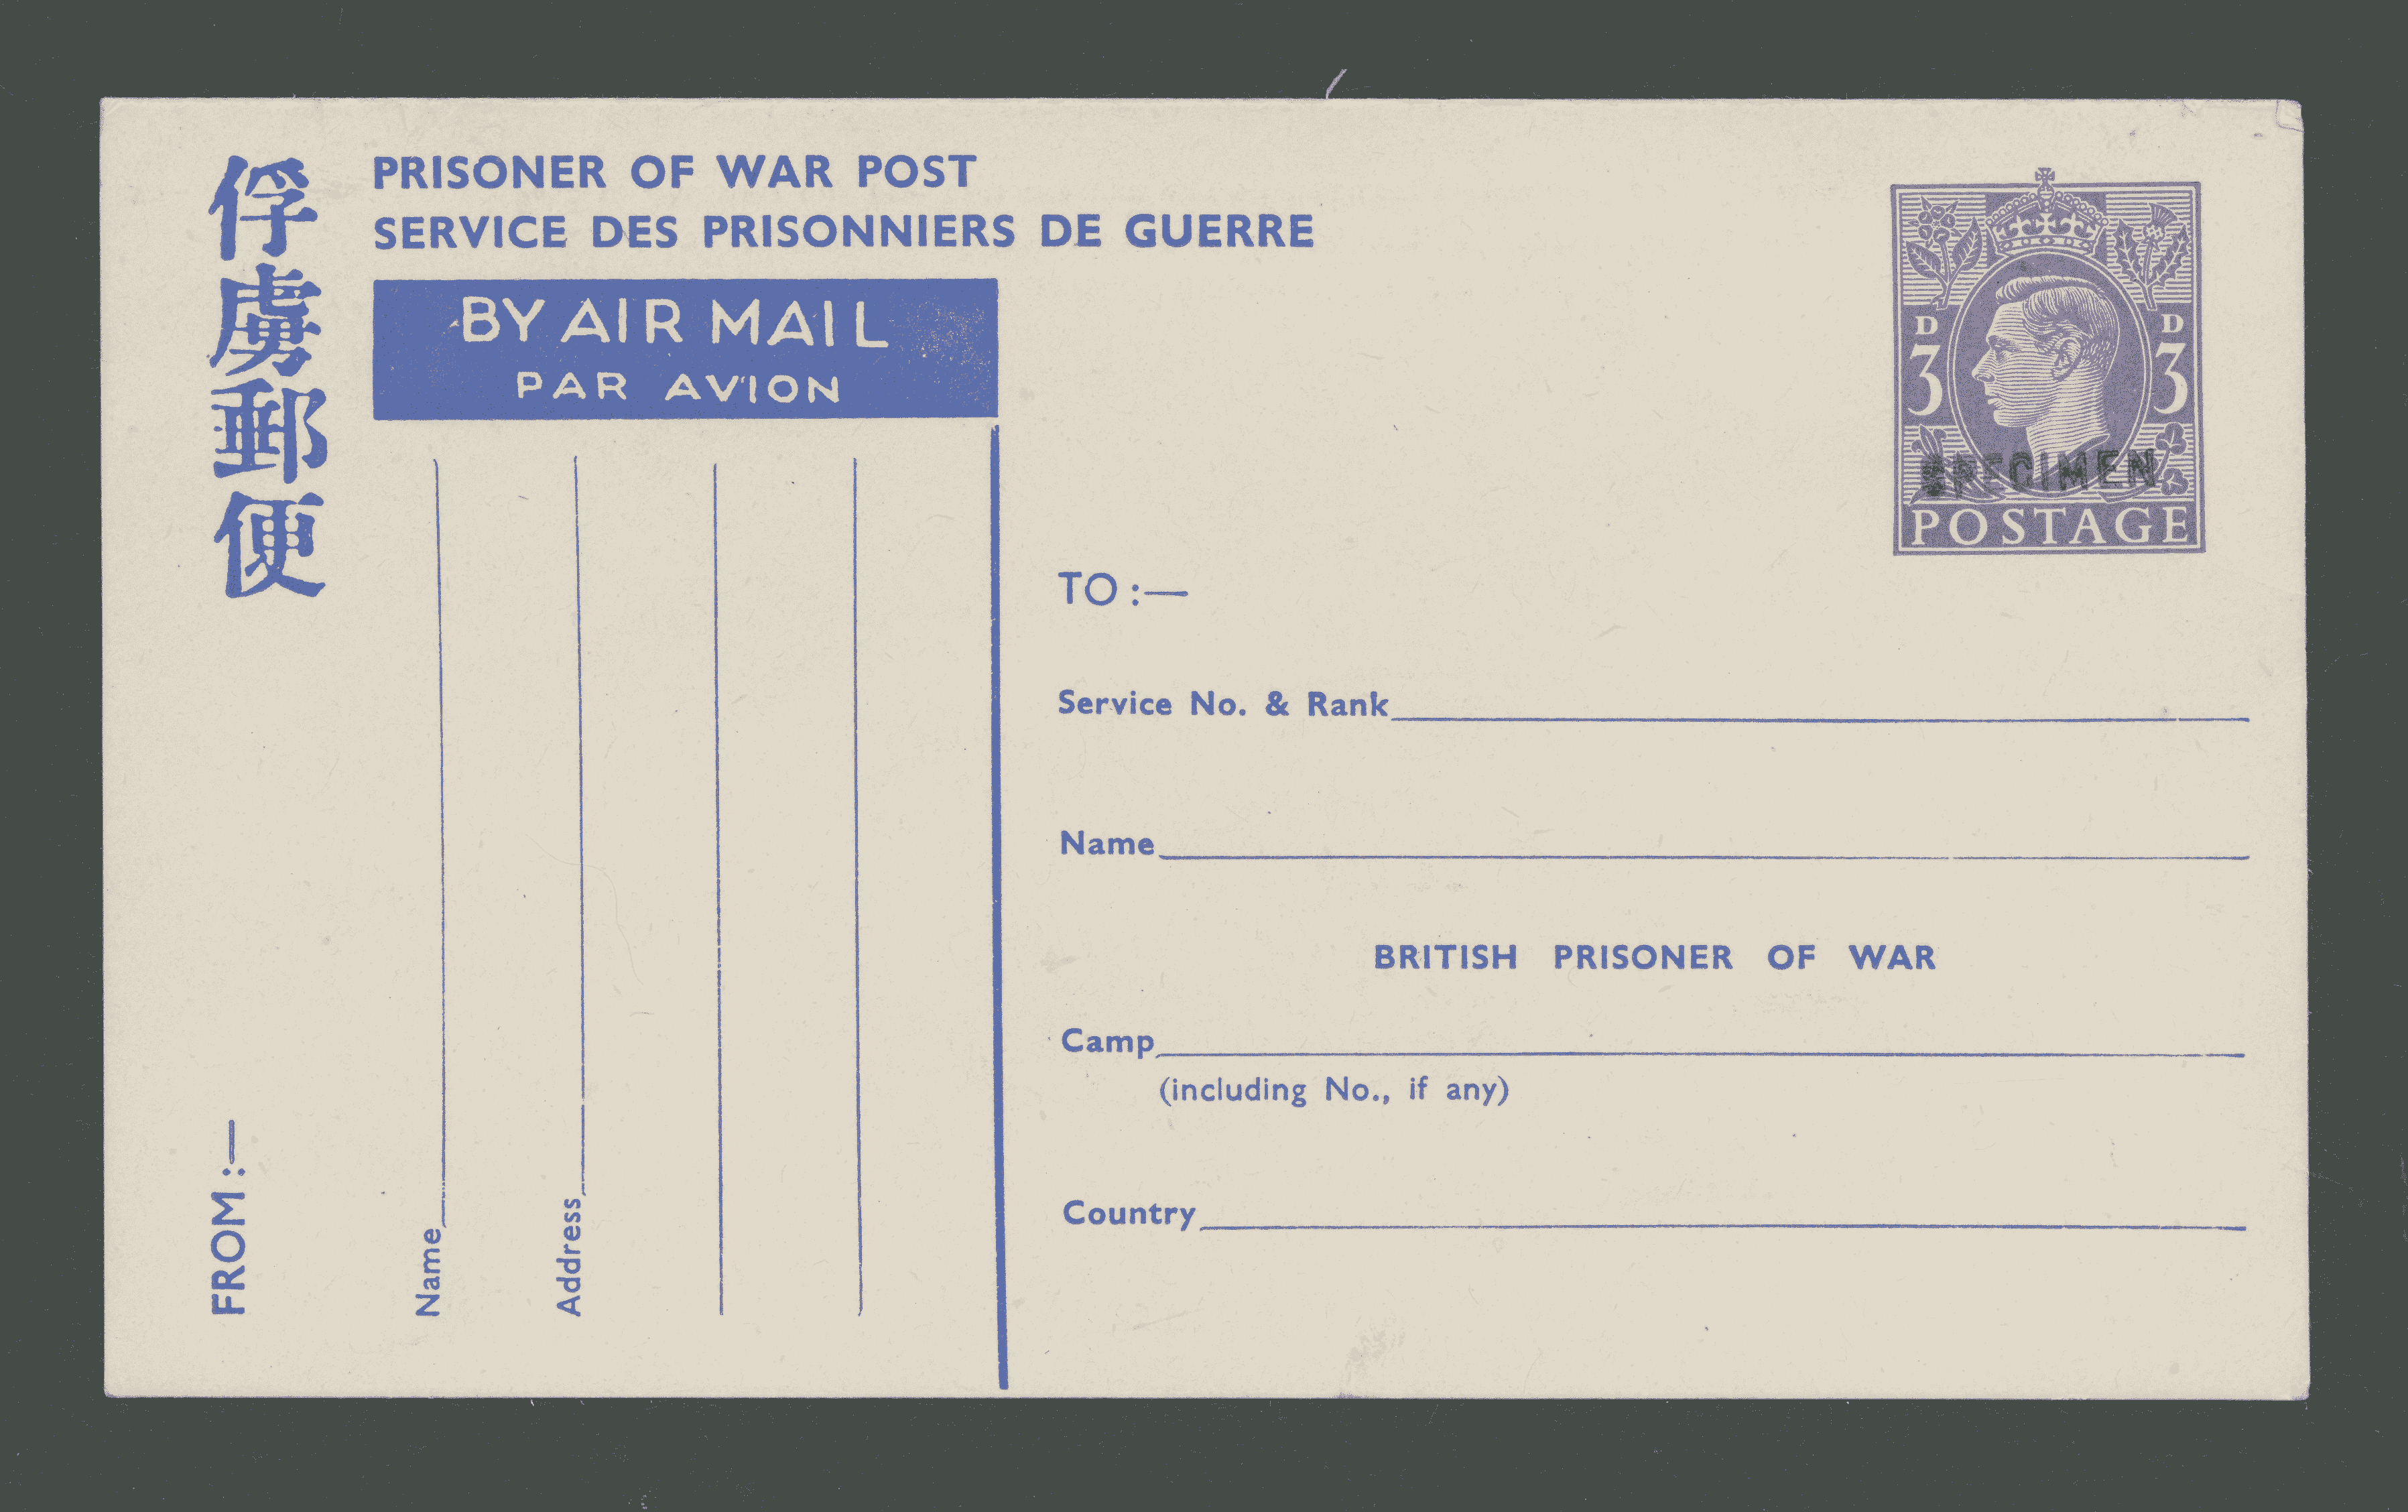 Blank postcard with space to write a 'from' name and address and 'to' details such as 'Service no. & rank', 'name', 'camp' and 'country'.